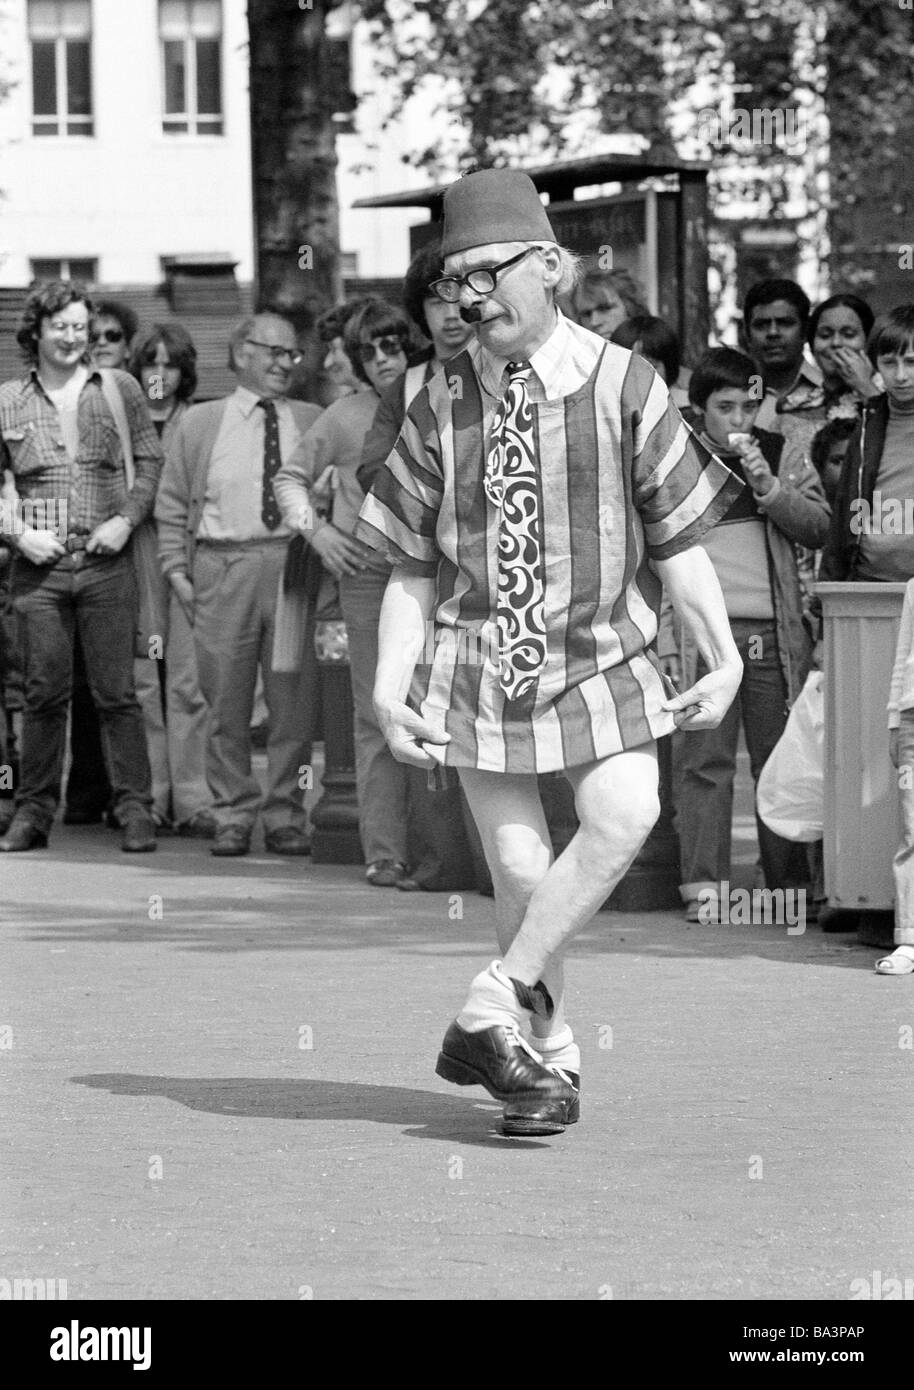 Seventies, black and white photo, humour, people, visitors on a sqare have fun with a costumed comedian, aged 60 to 70 years, Great Britain, England, London Stock Photo